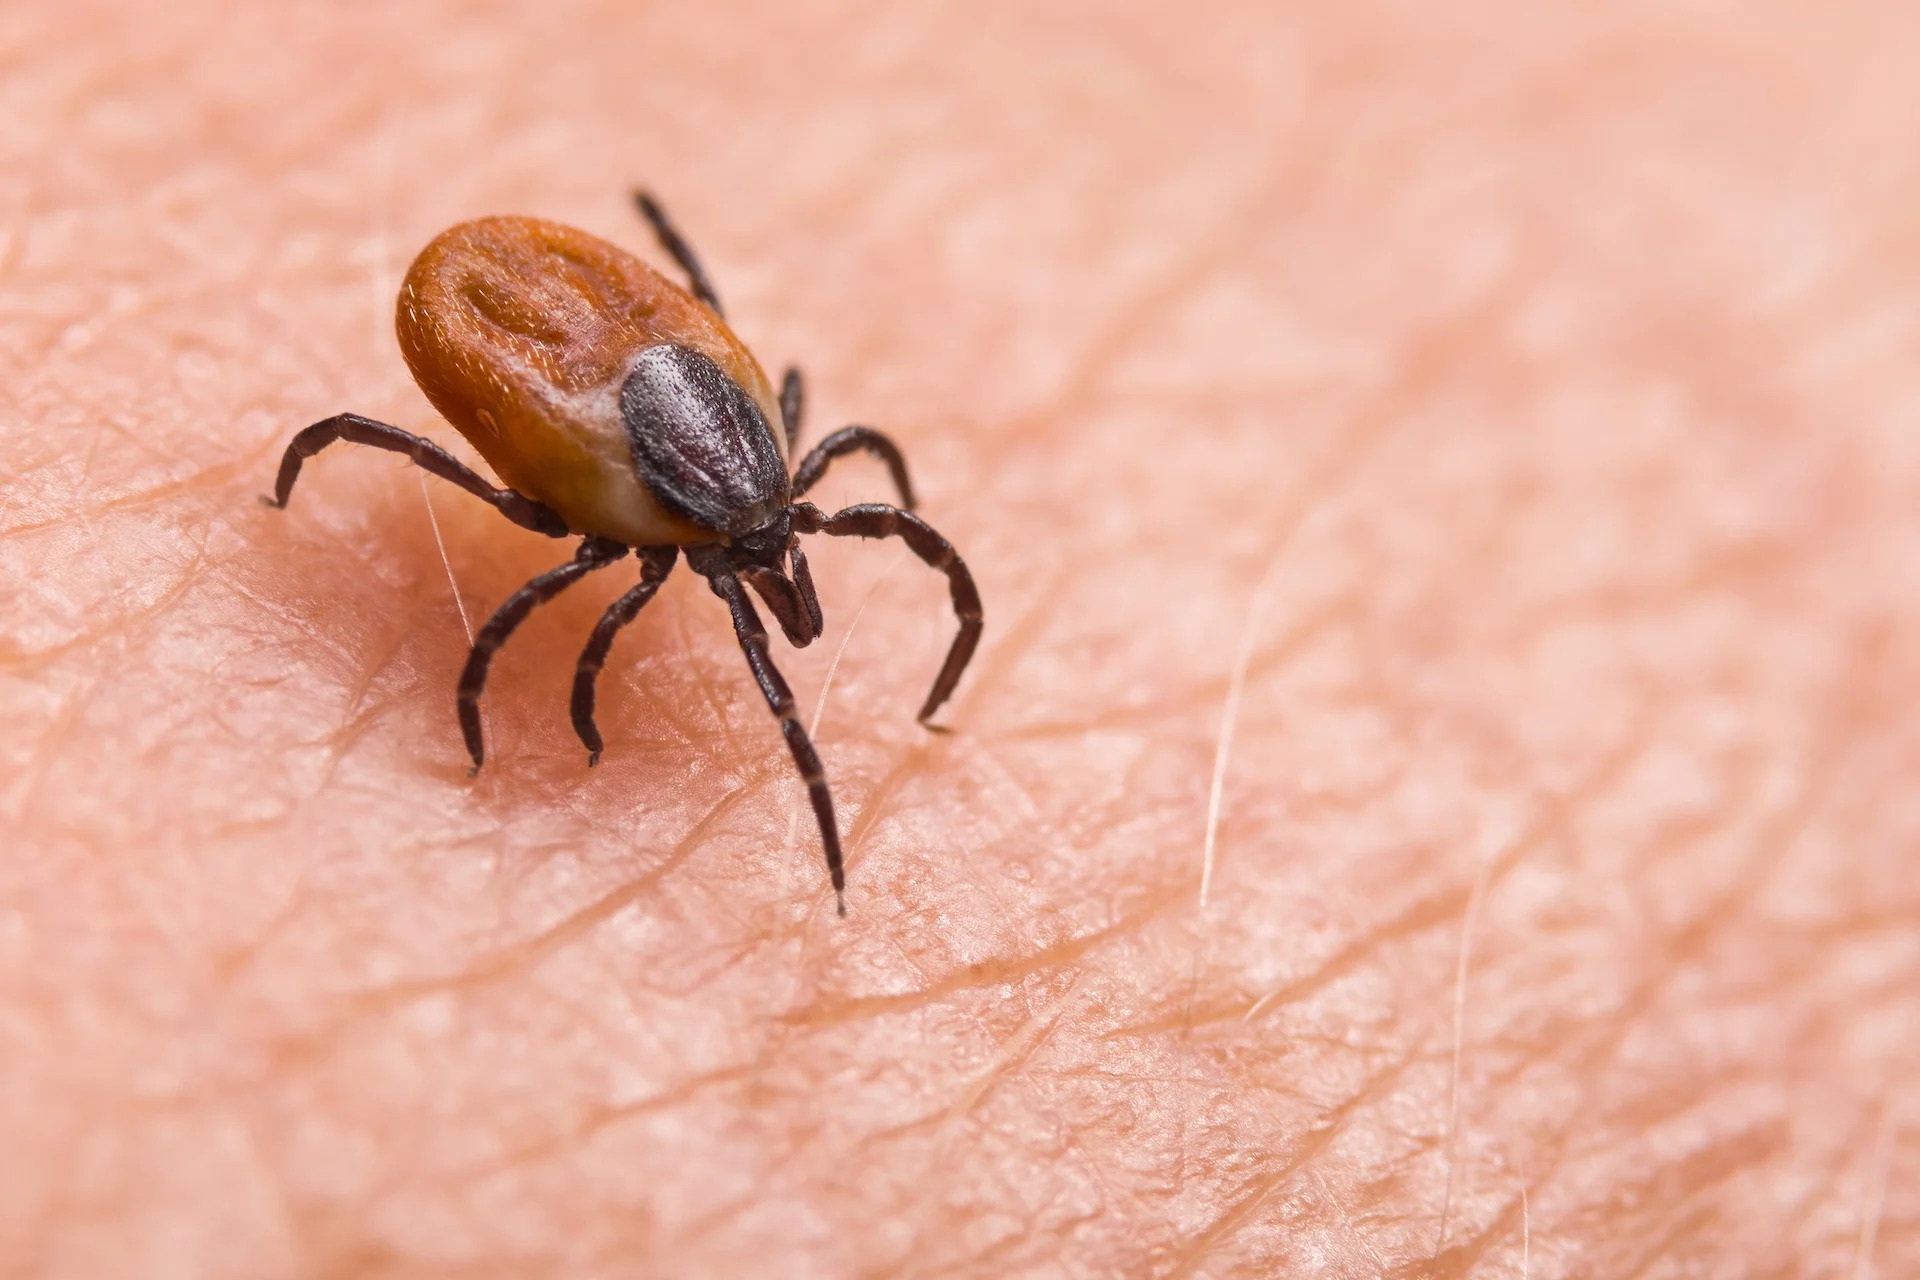 Ticks could spread throughout Quebec in coming decades: Public health institute